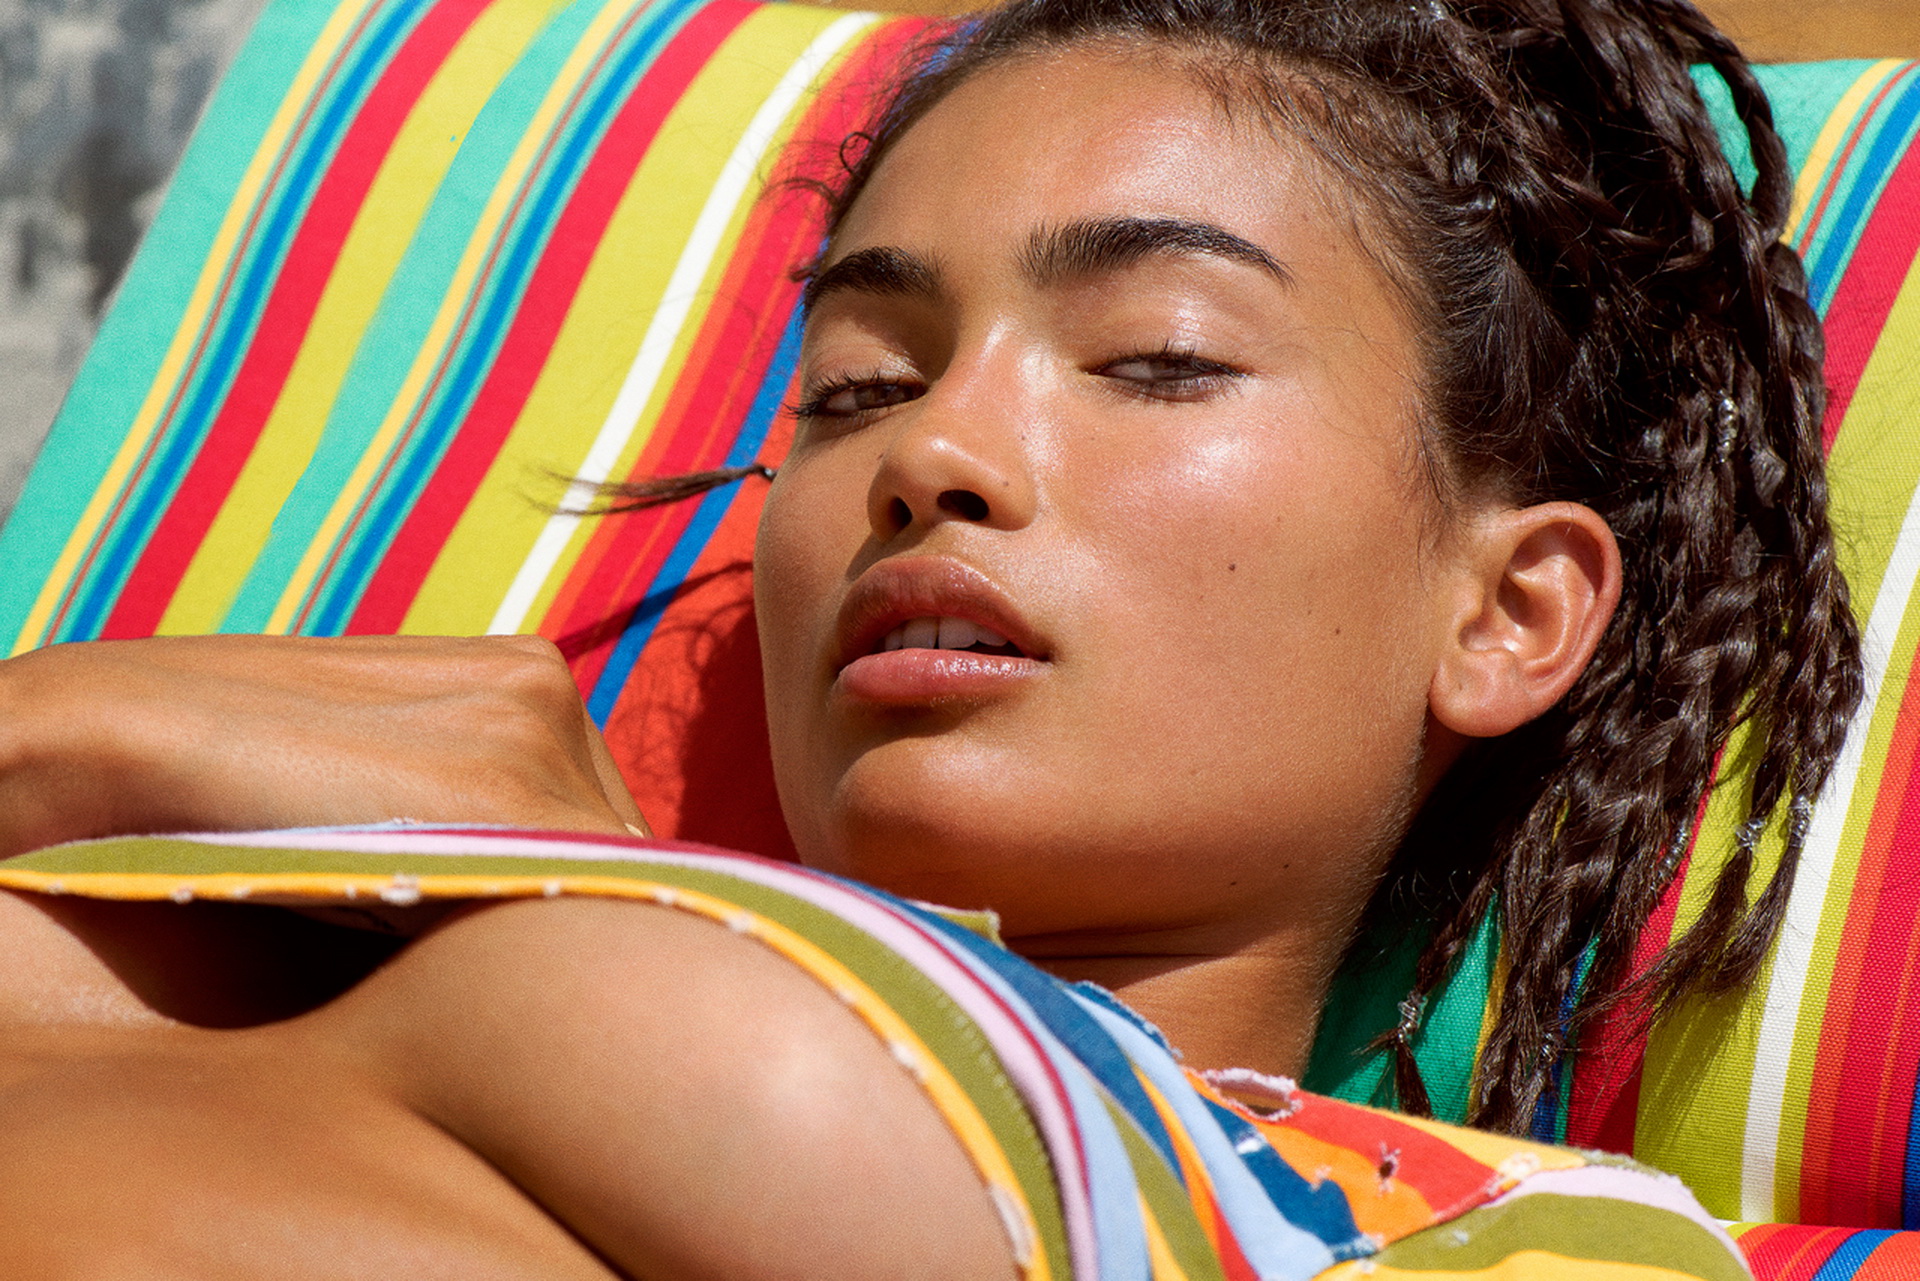 Kelly Gale topless for Chris Heads photo shoot 15x HQ photos 13.jpg